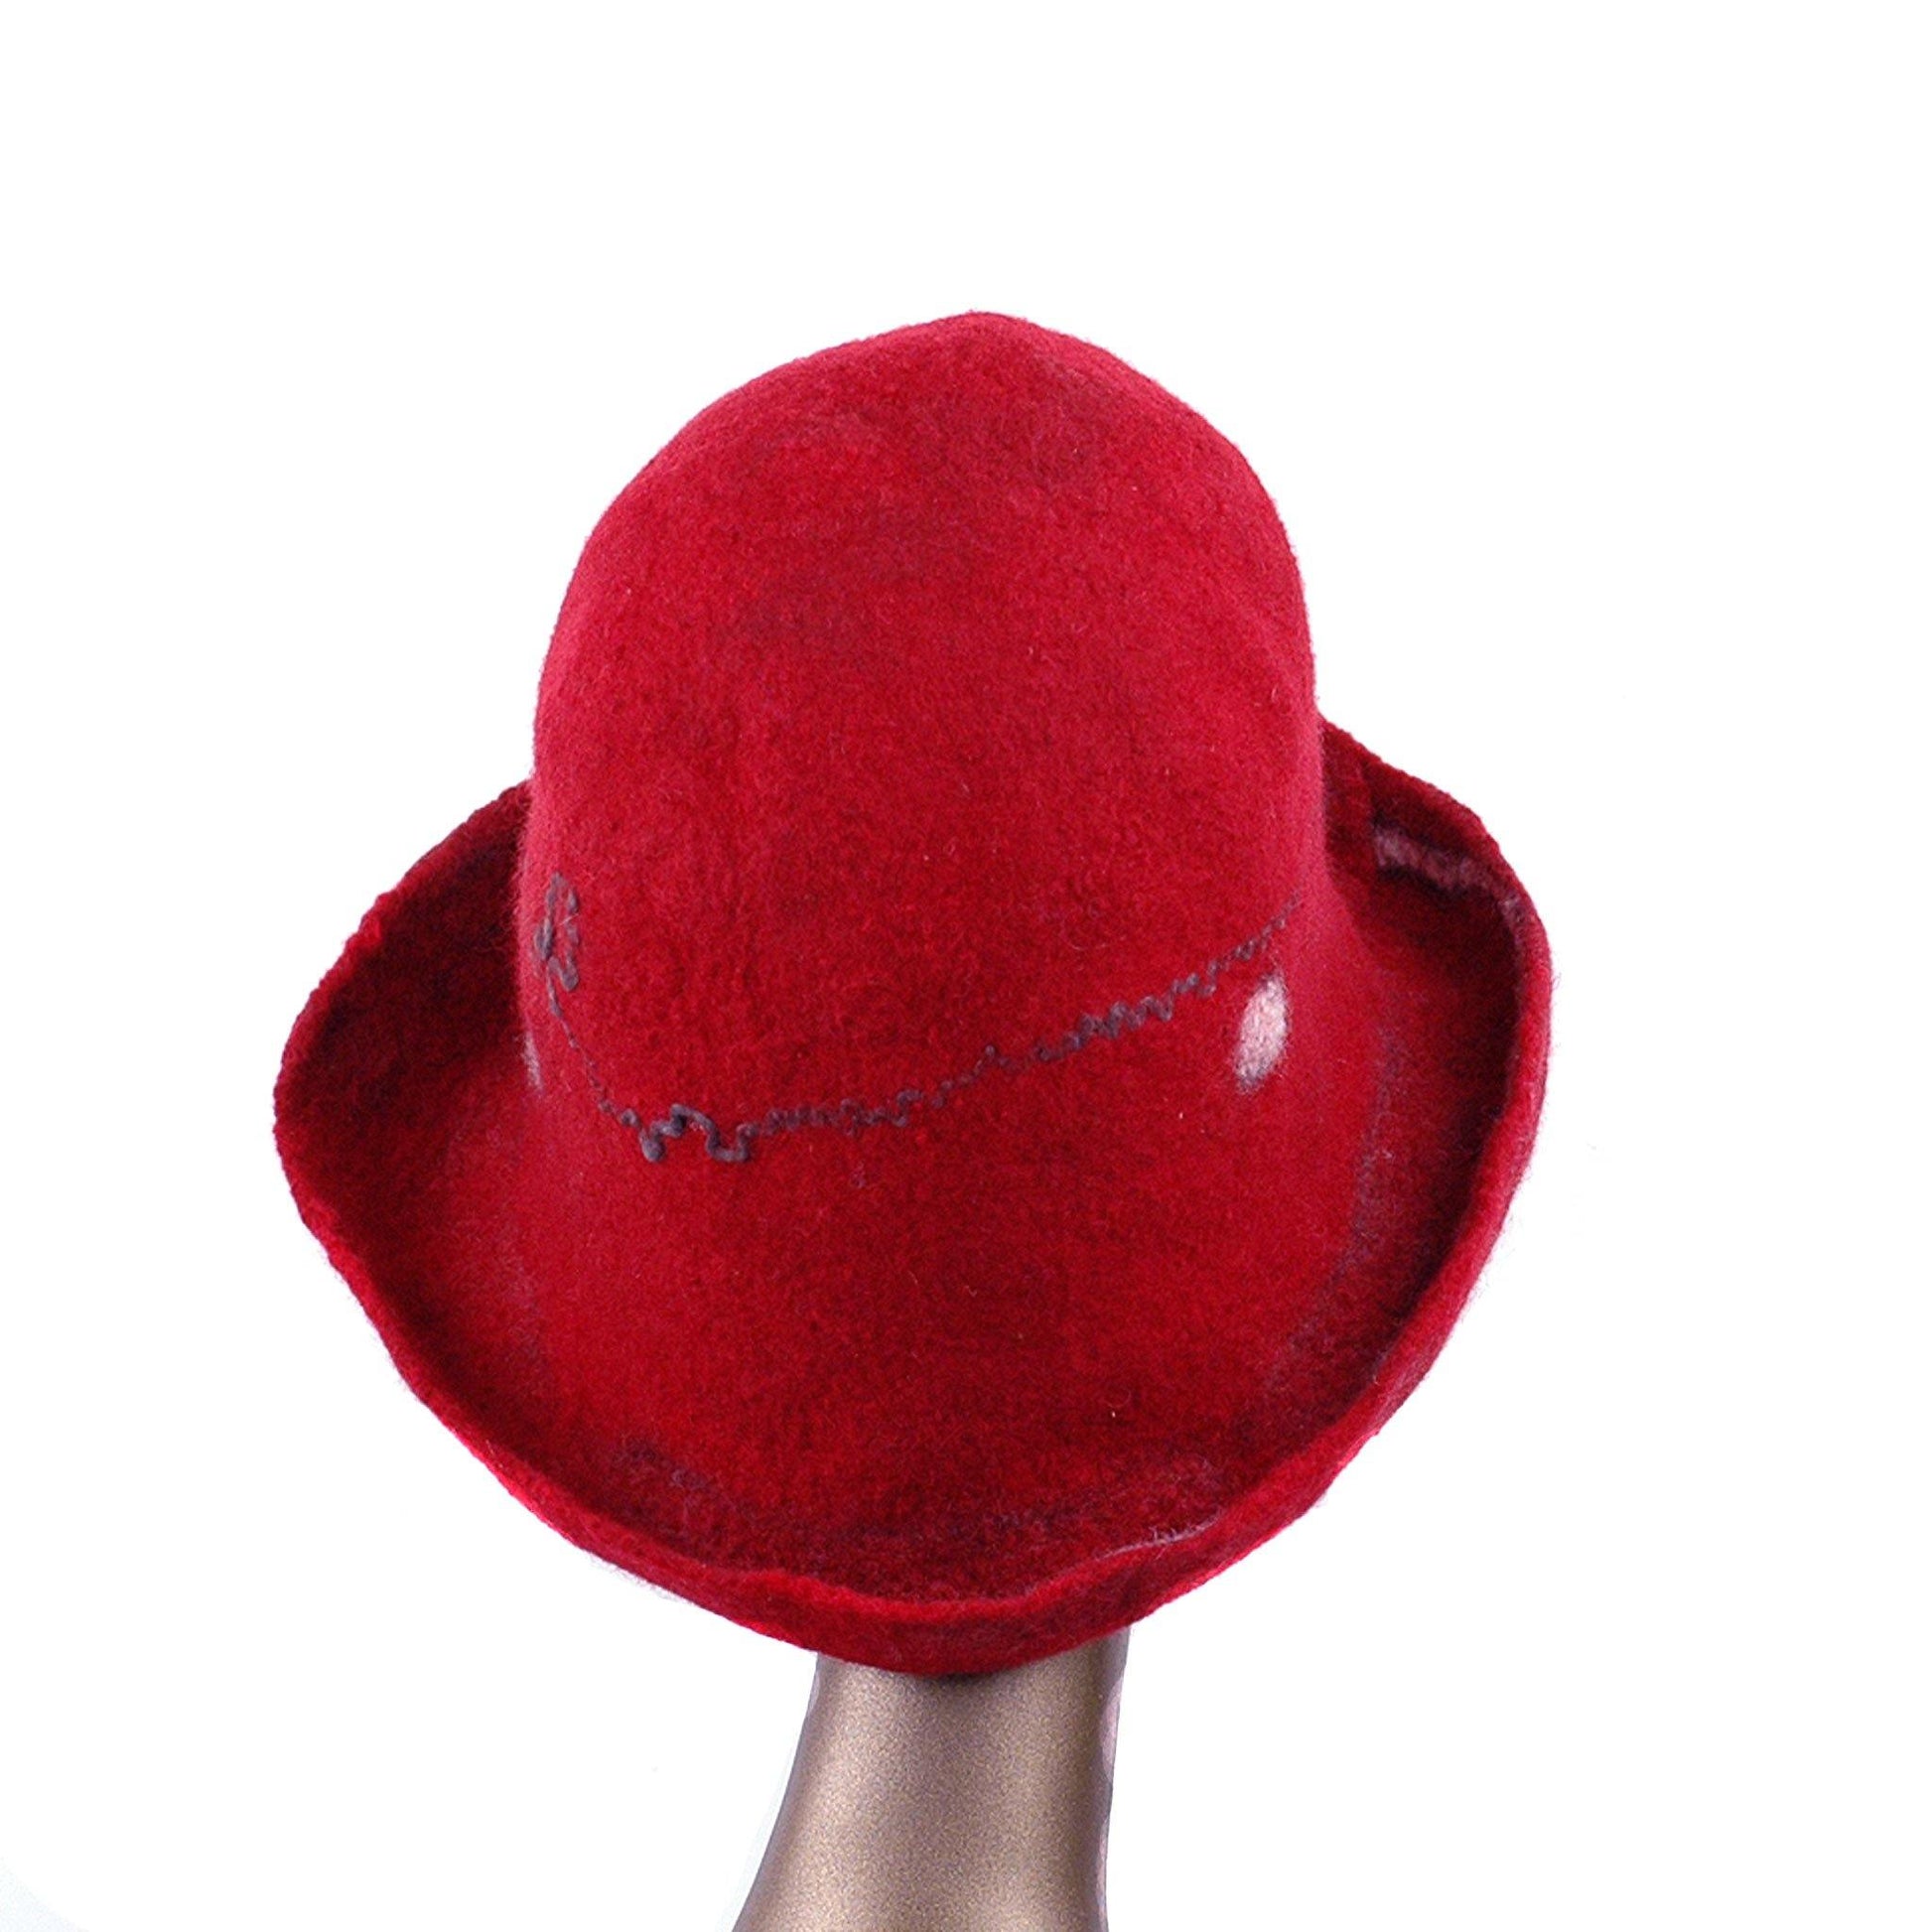 Tall Red and Black Brimmed Hat with Geometric Shapes - back view